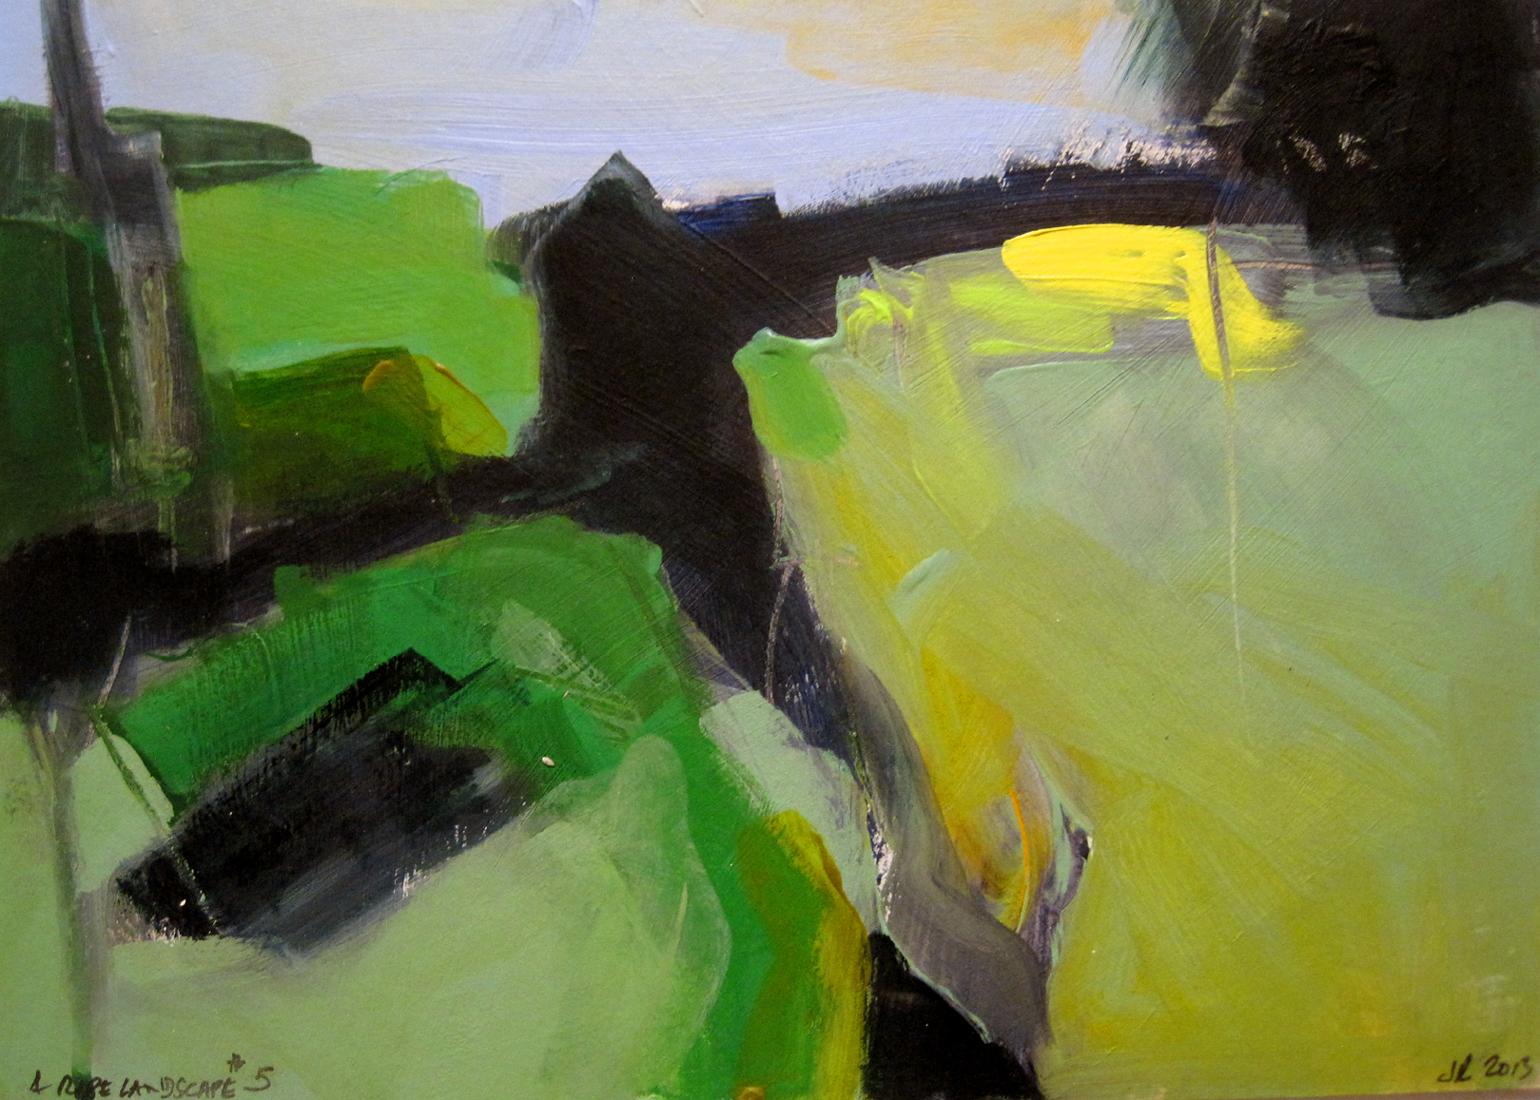  A Ripe Landscape #2, A Ripe Landscape #5 and A Ripe Landscape #6 triptych - Painting by Jon Rowland